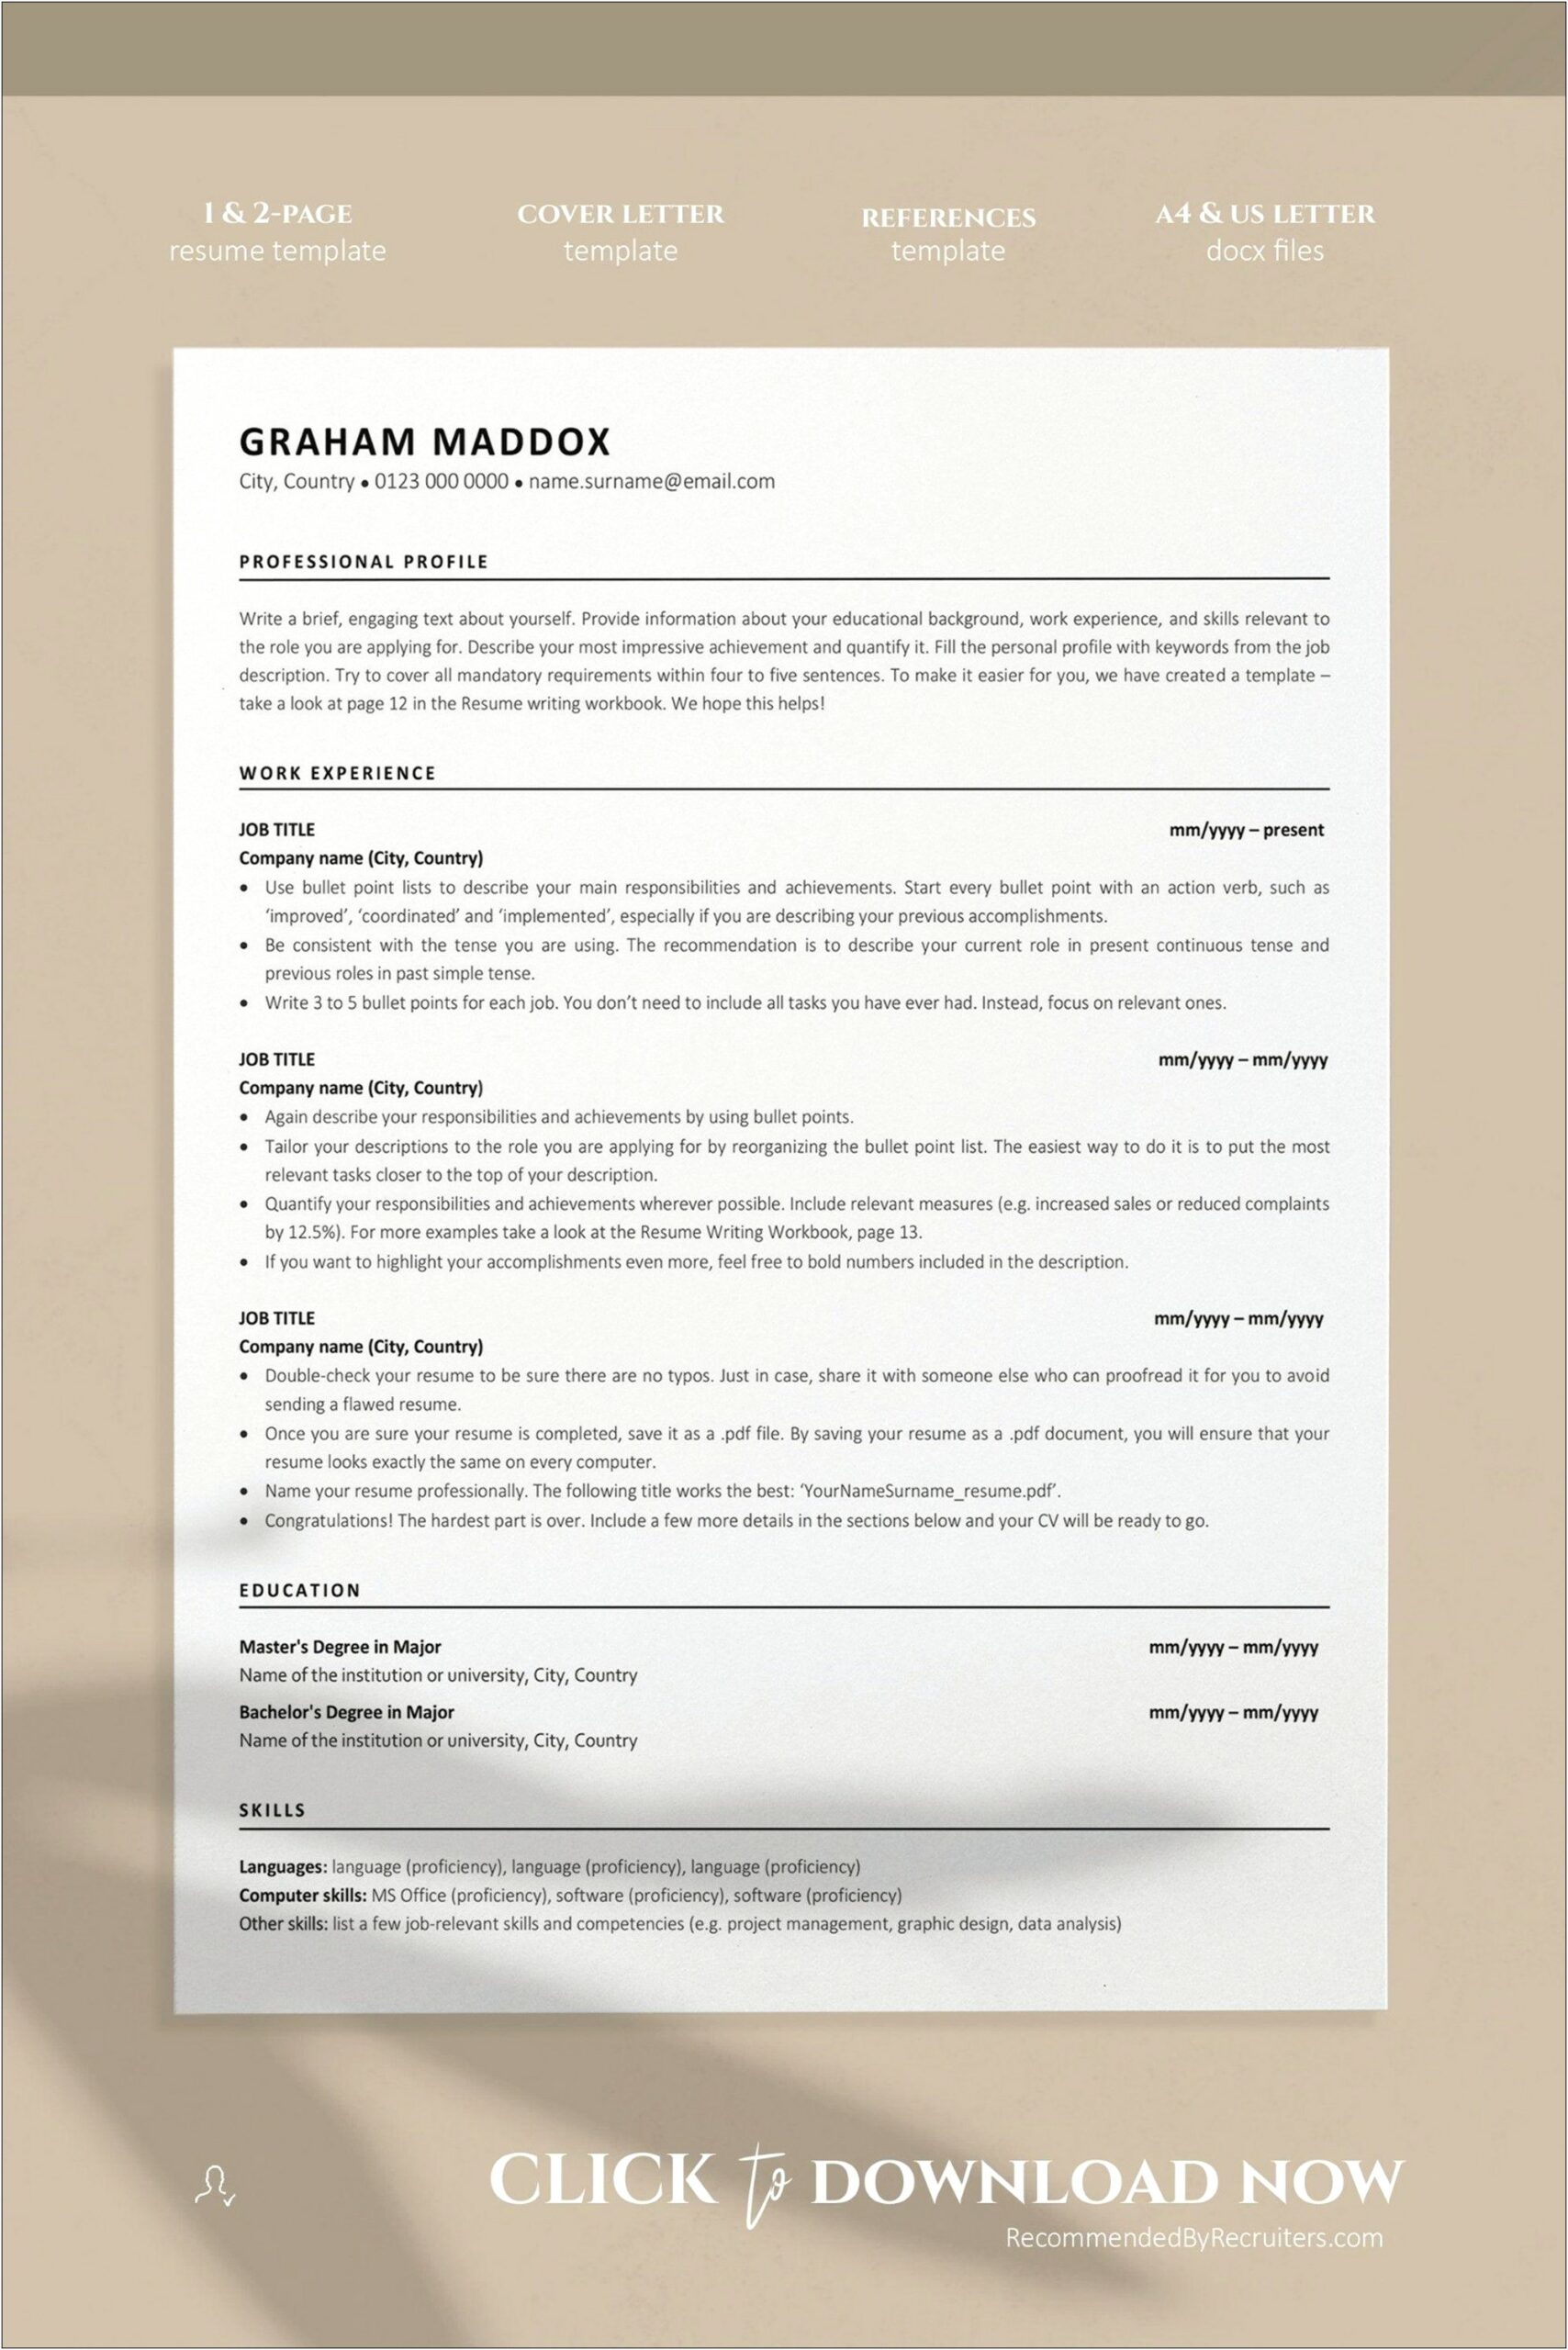 Free Classic Resume Template Download